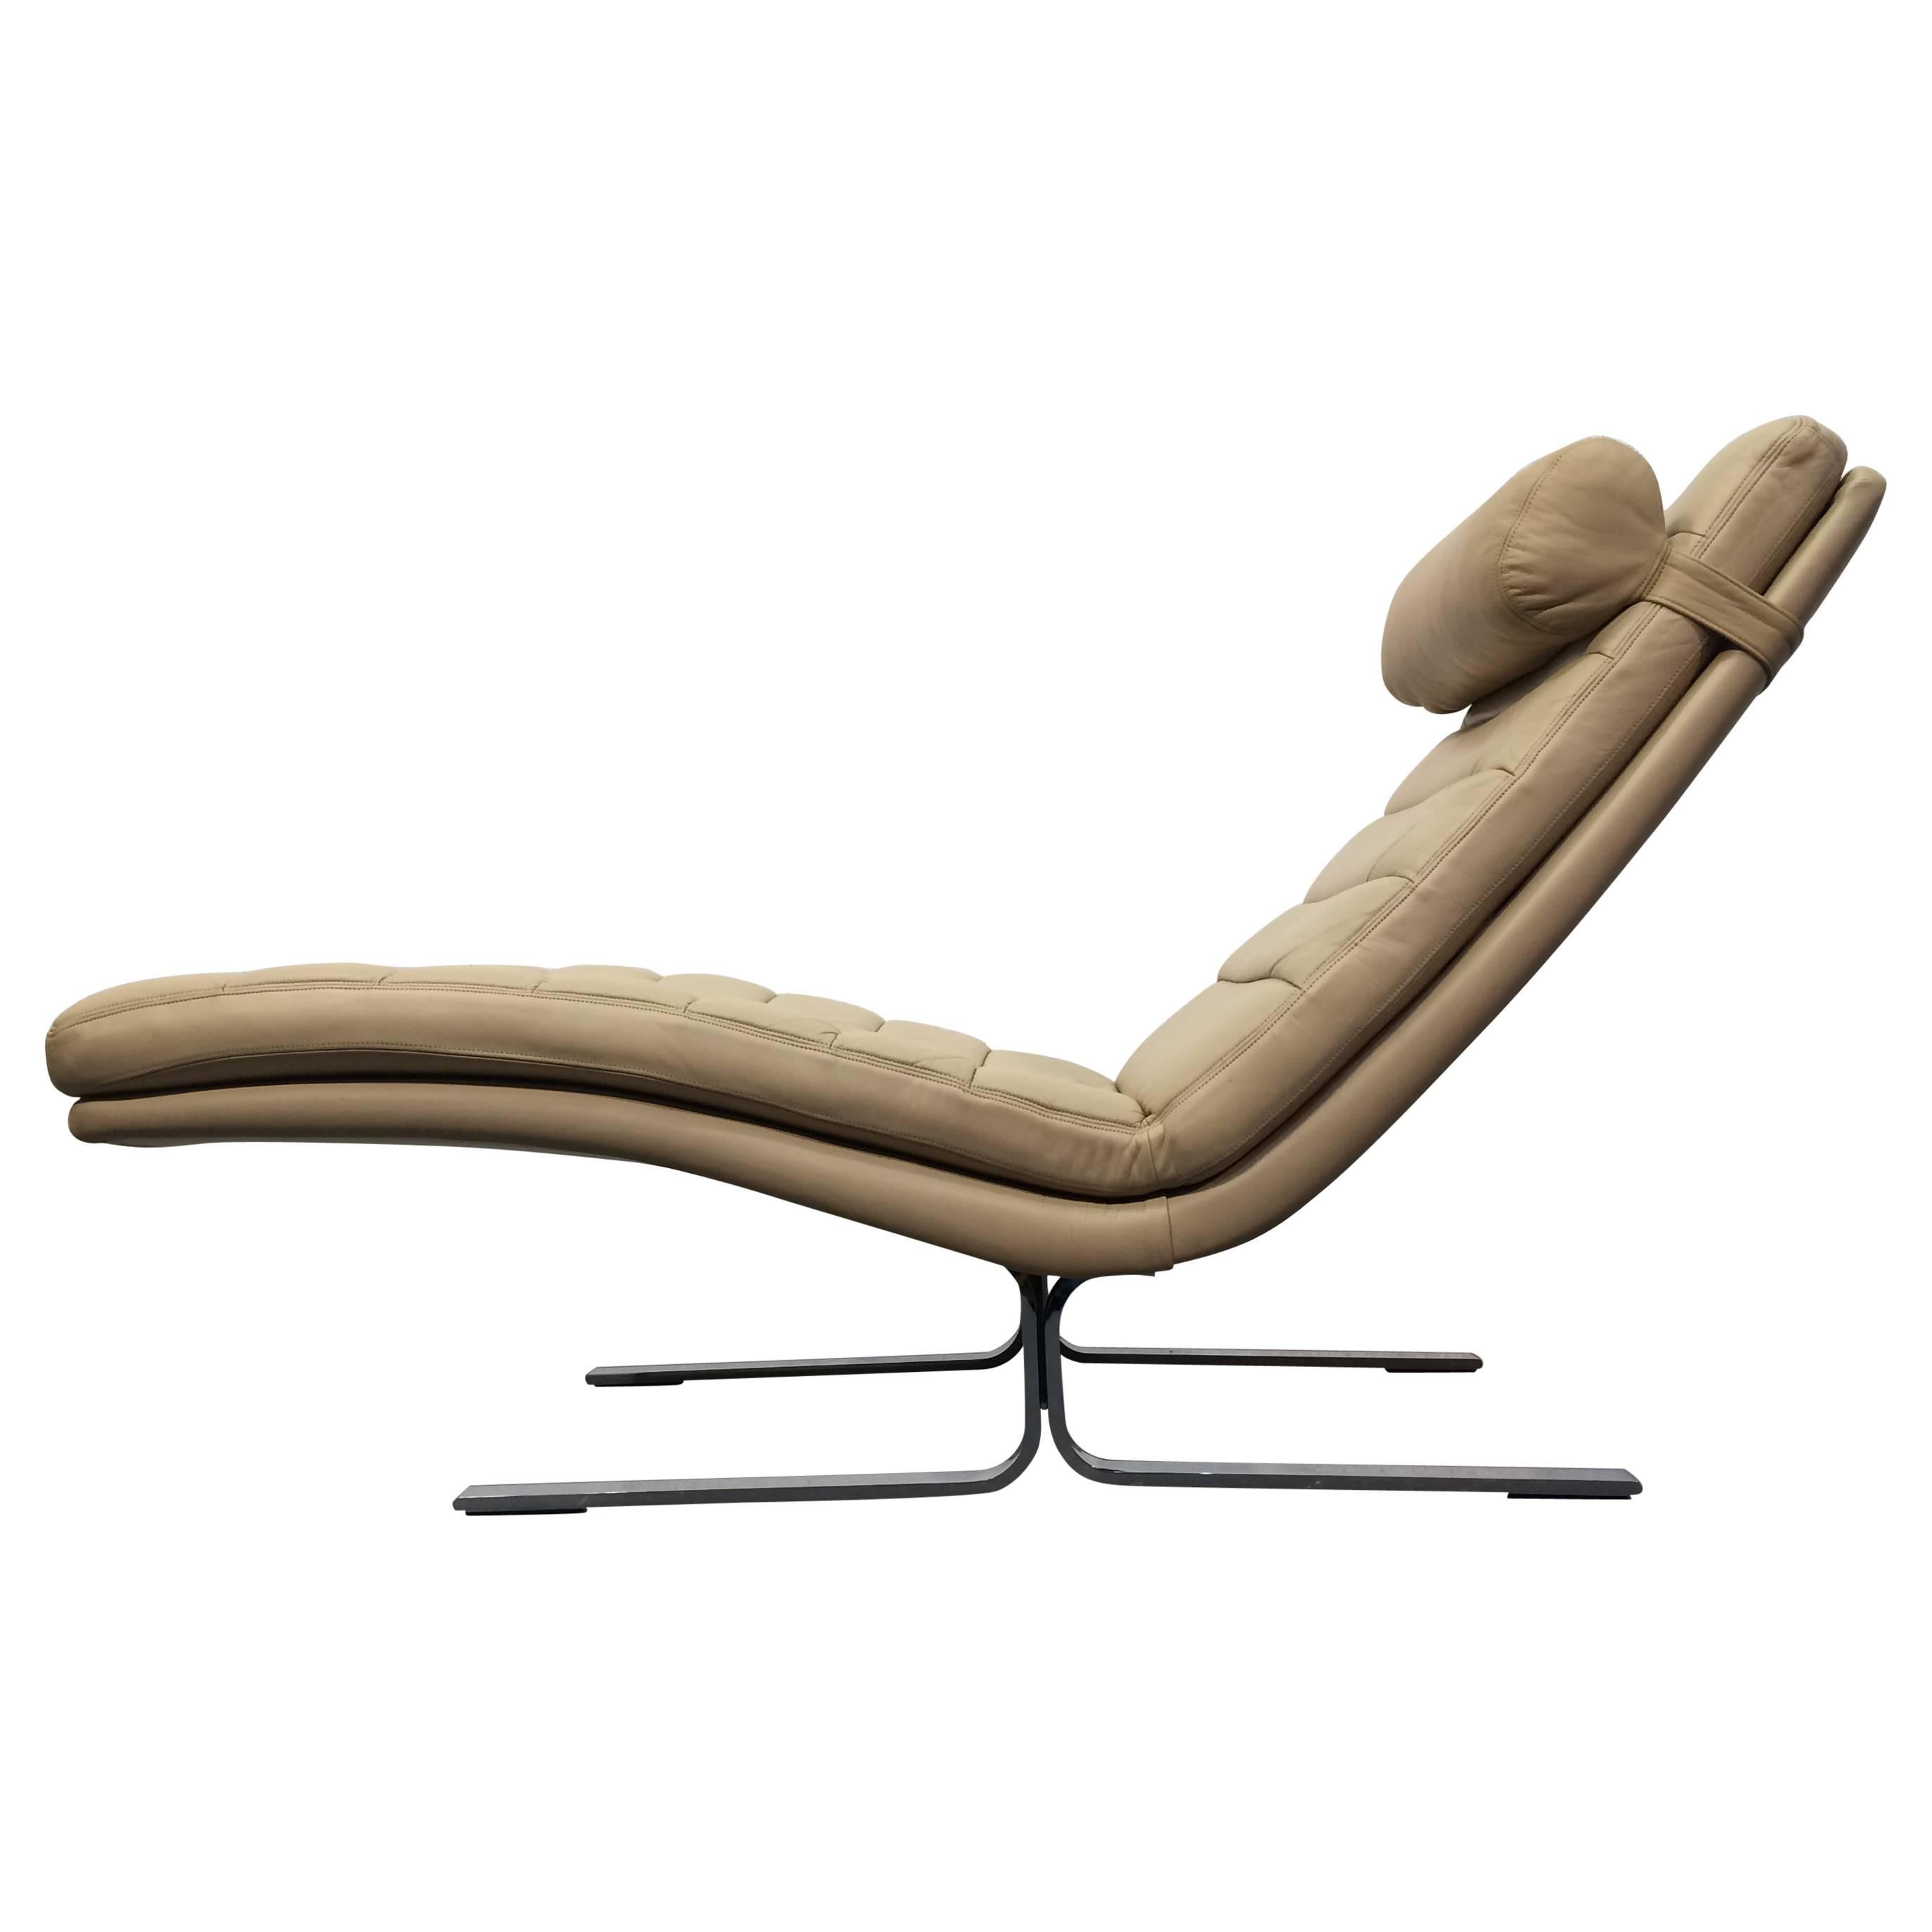 Leather Chaise Longue by Harvey Probber, USA, 1970s